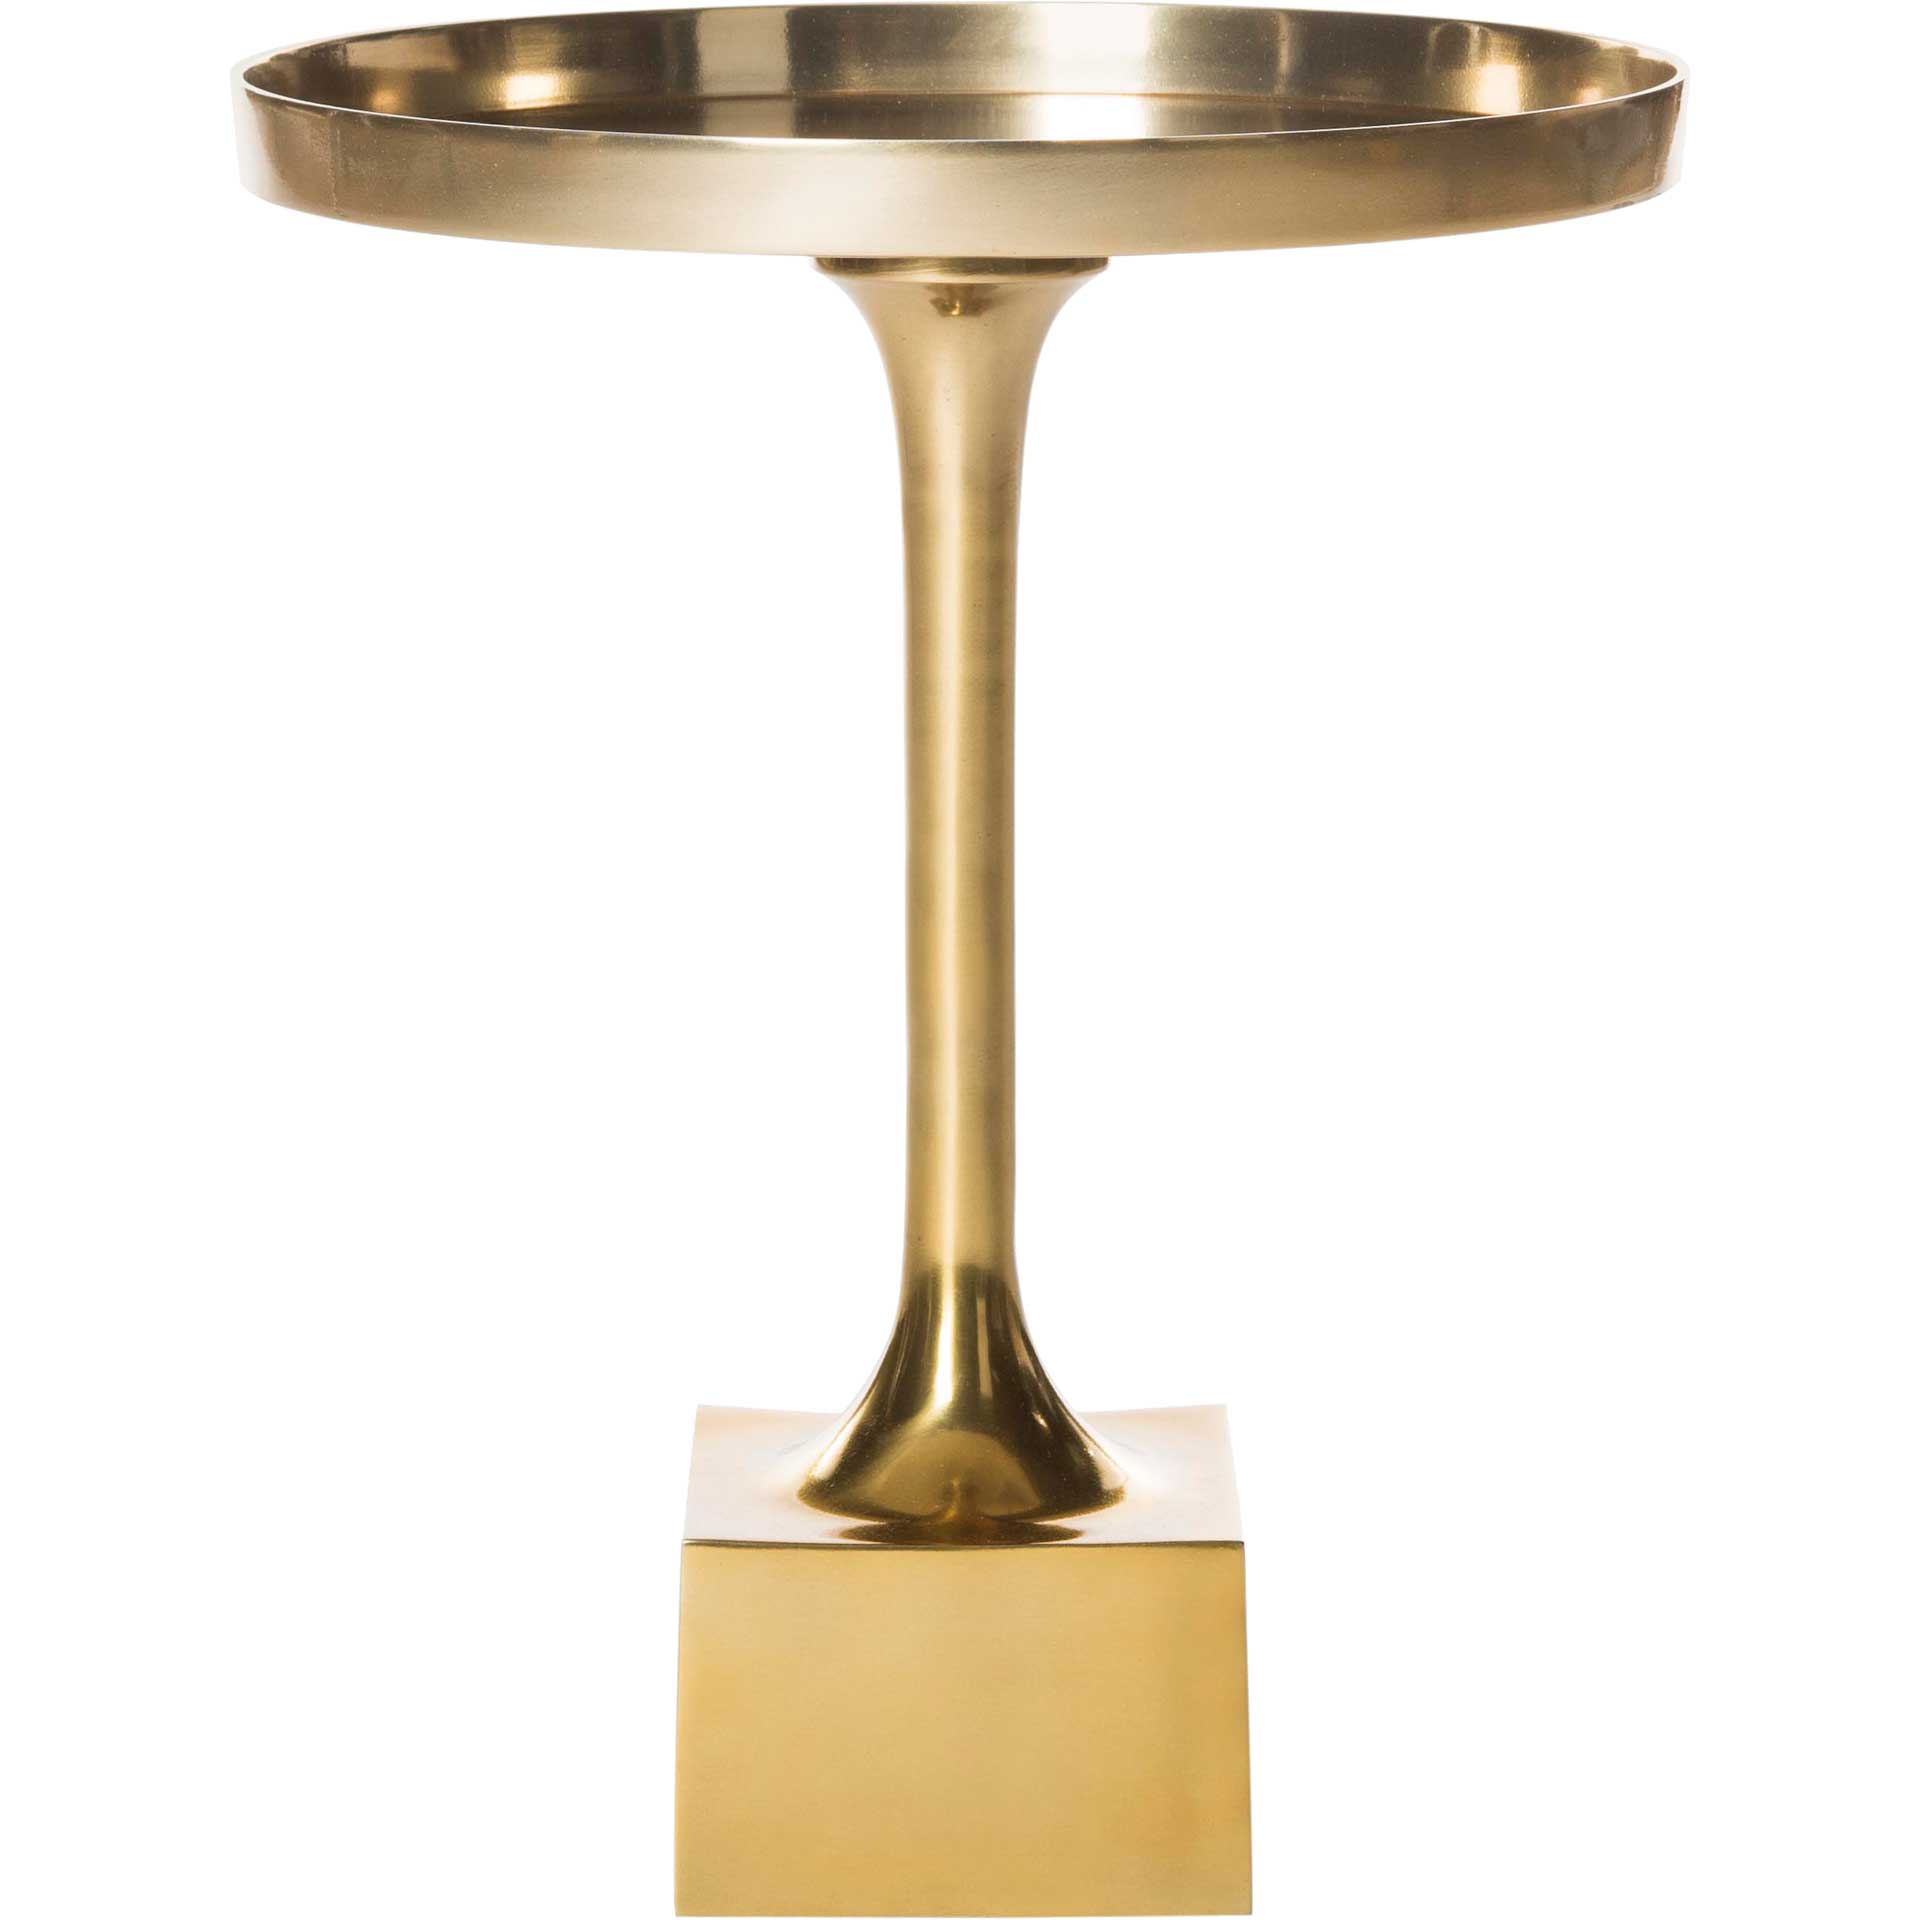 Coast Round Side Table Antique Brass